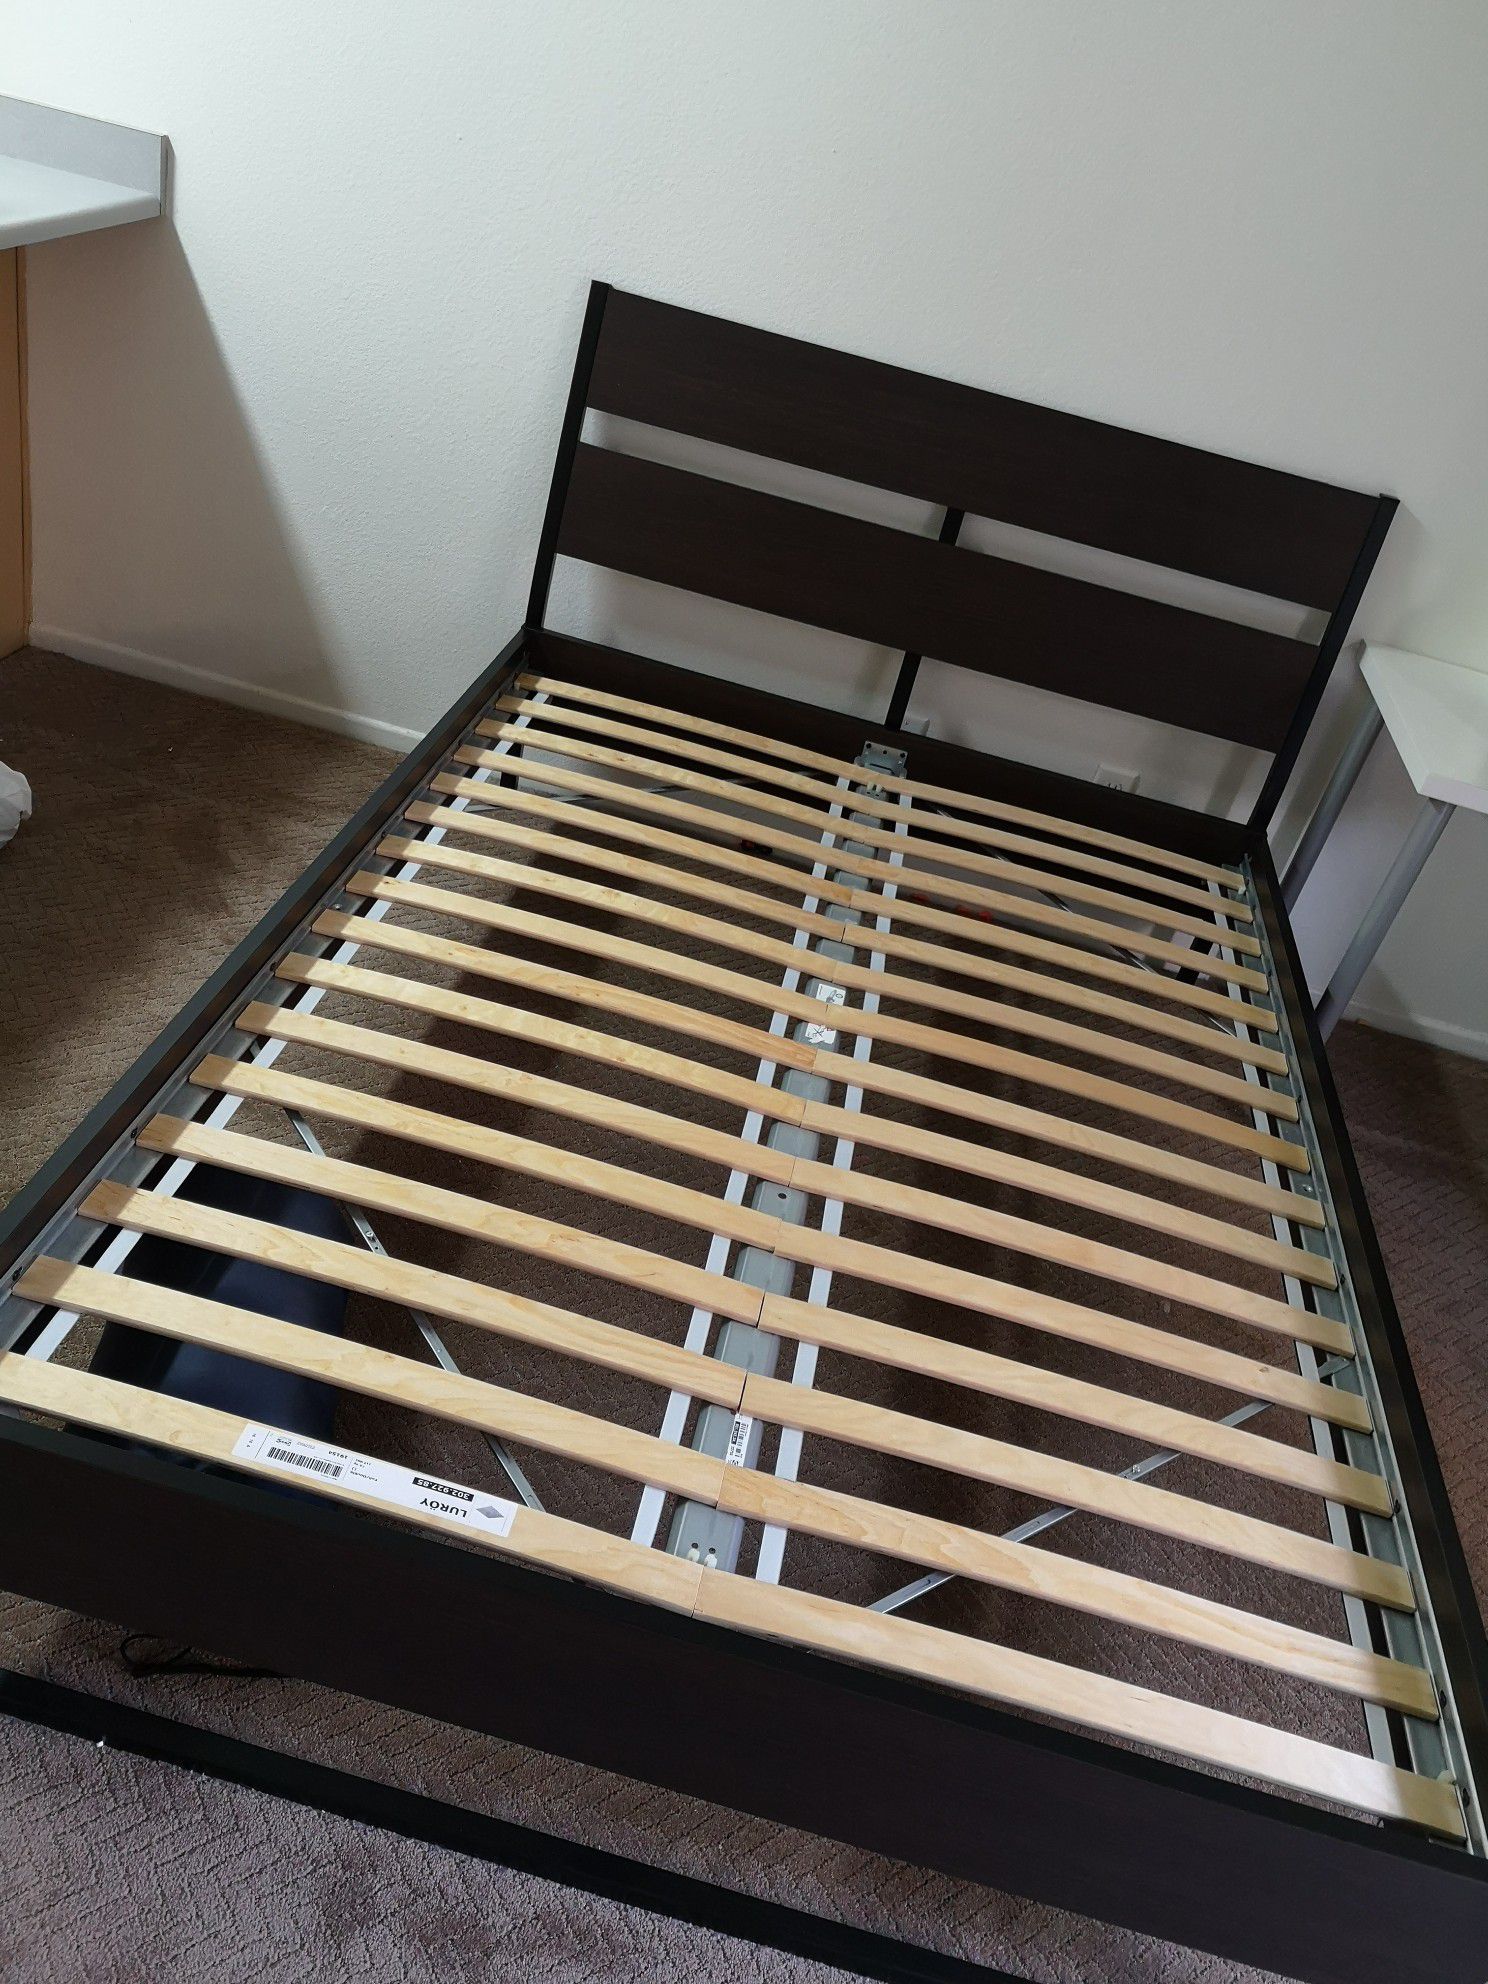 IKEA Bed Frame Quene Size